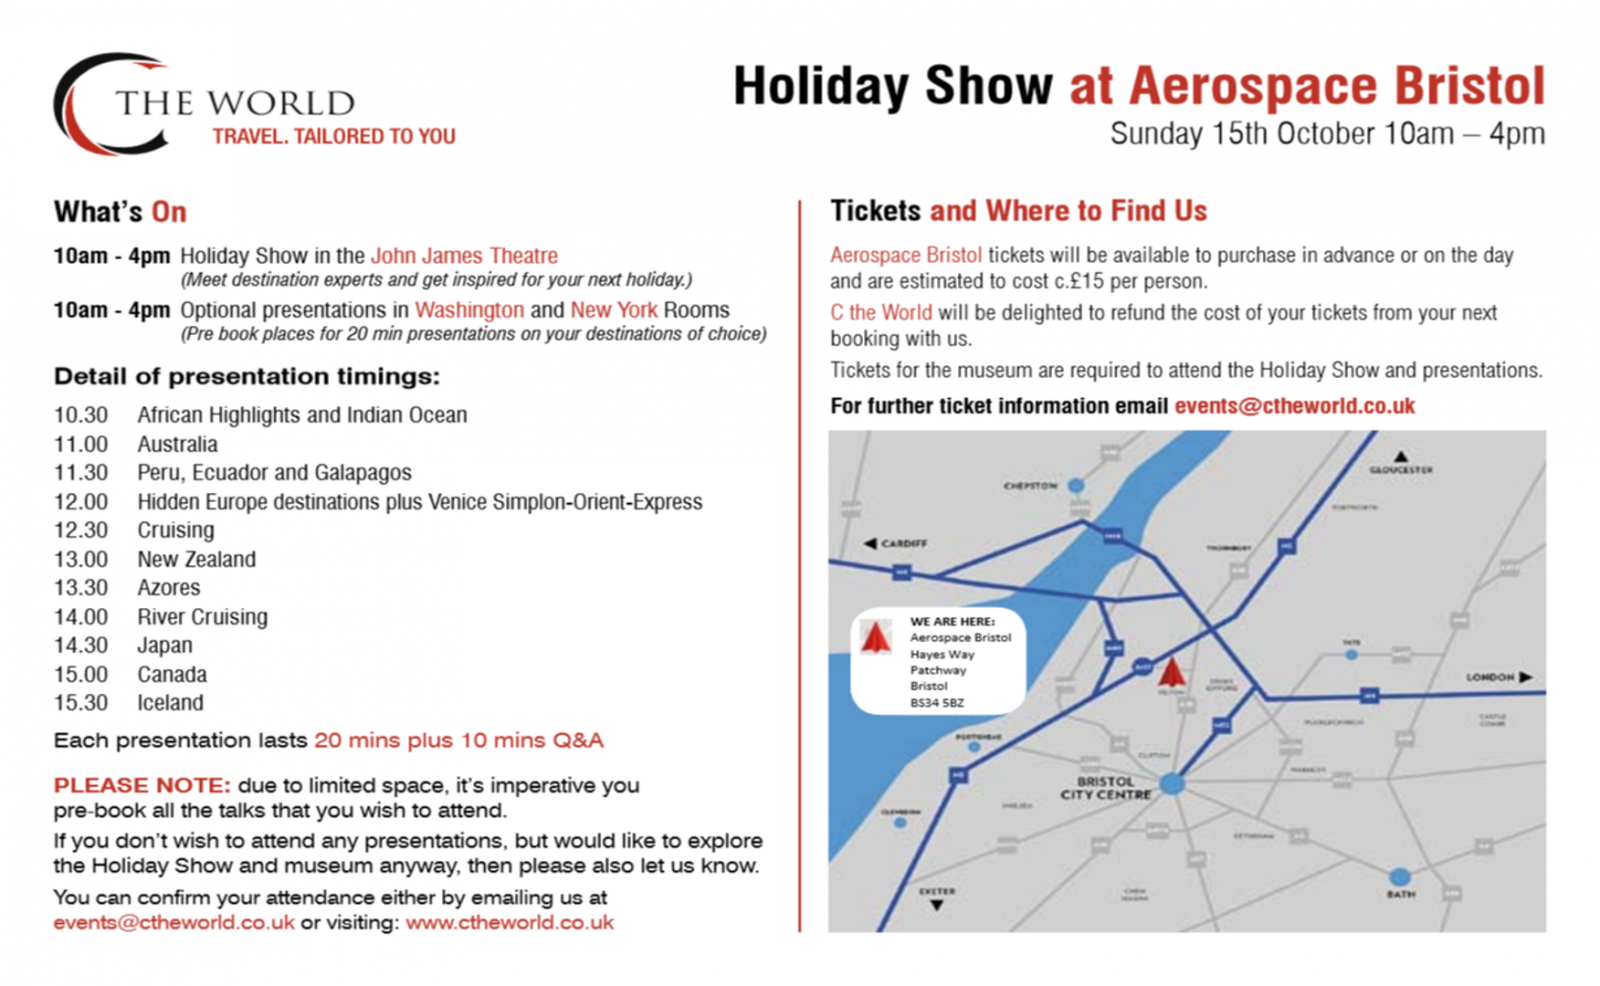 C The World's Holiday Show will be holding presentations on a great range of destinations throughout the day.